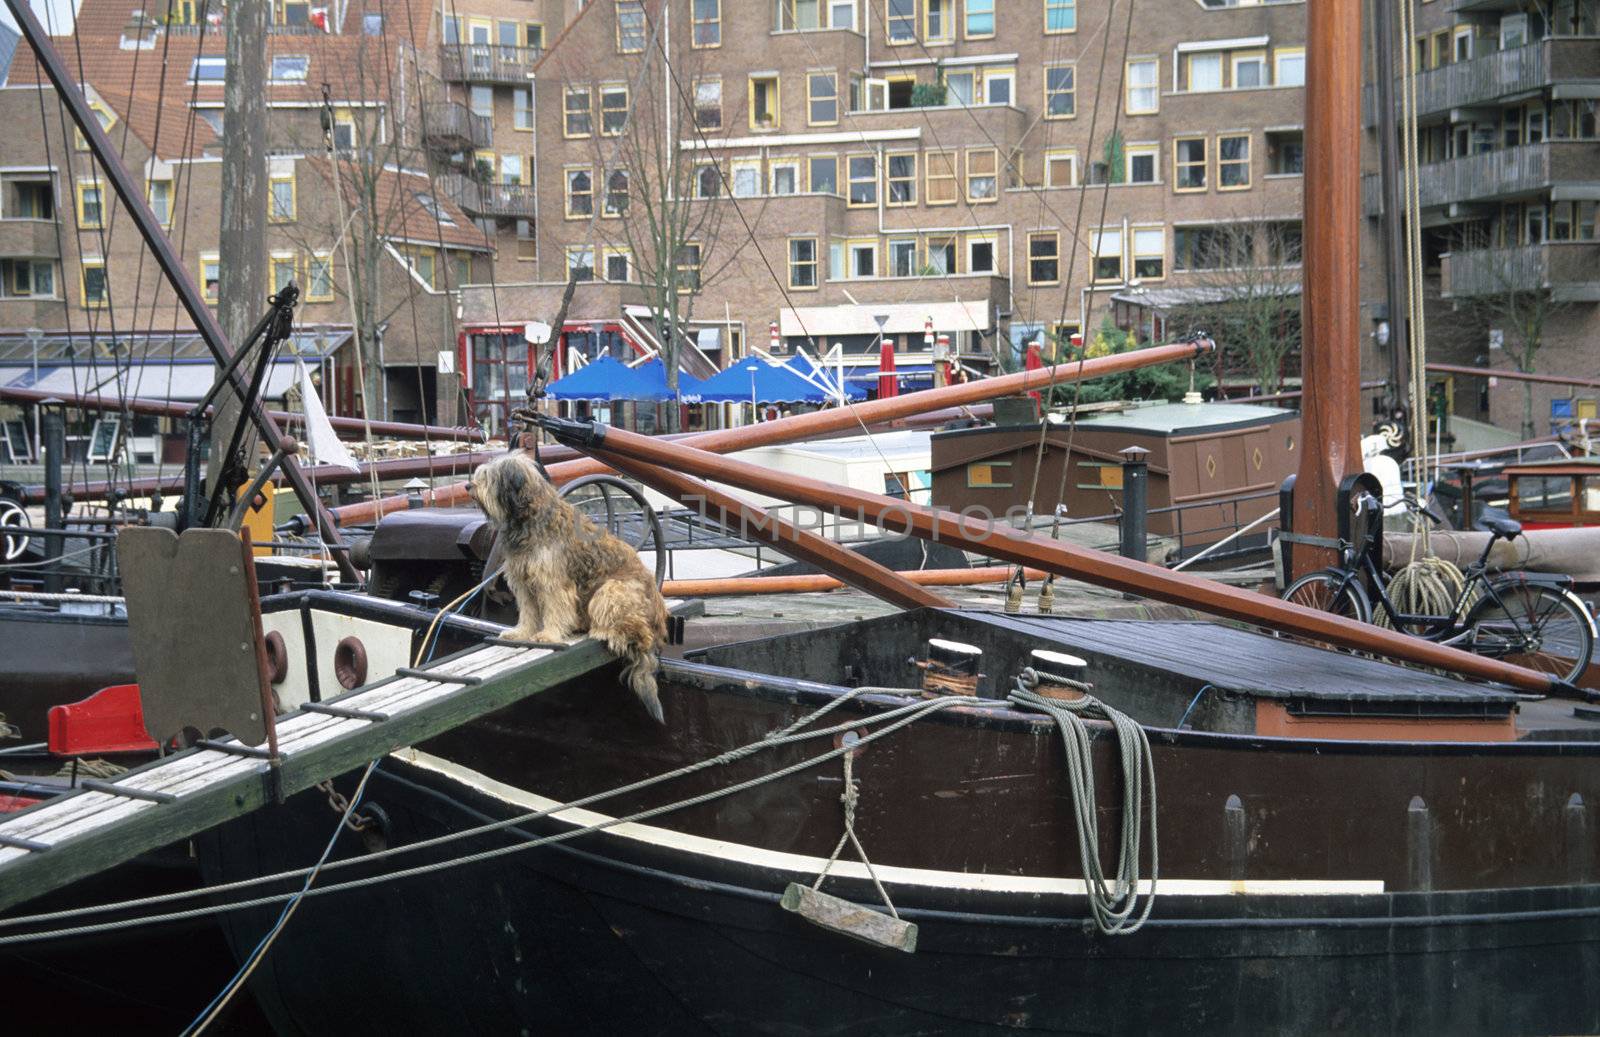 A furry gaurd dog watches over his master's houseboat in Rotterdam, the Netherlands.